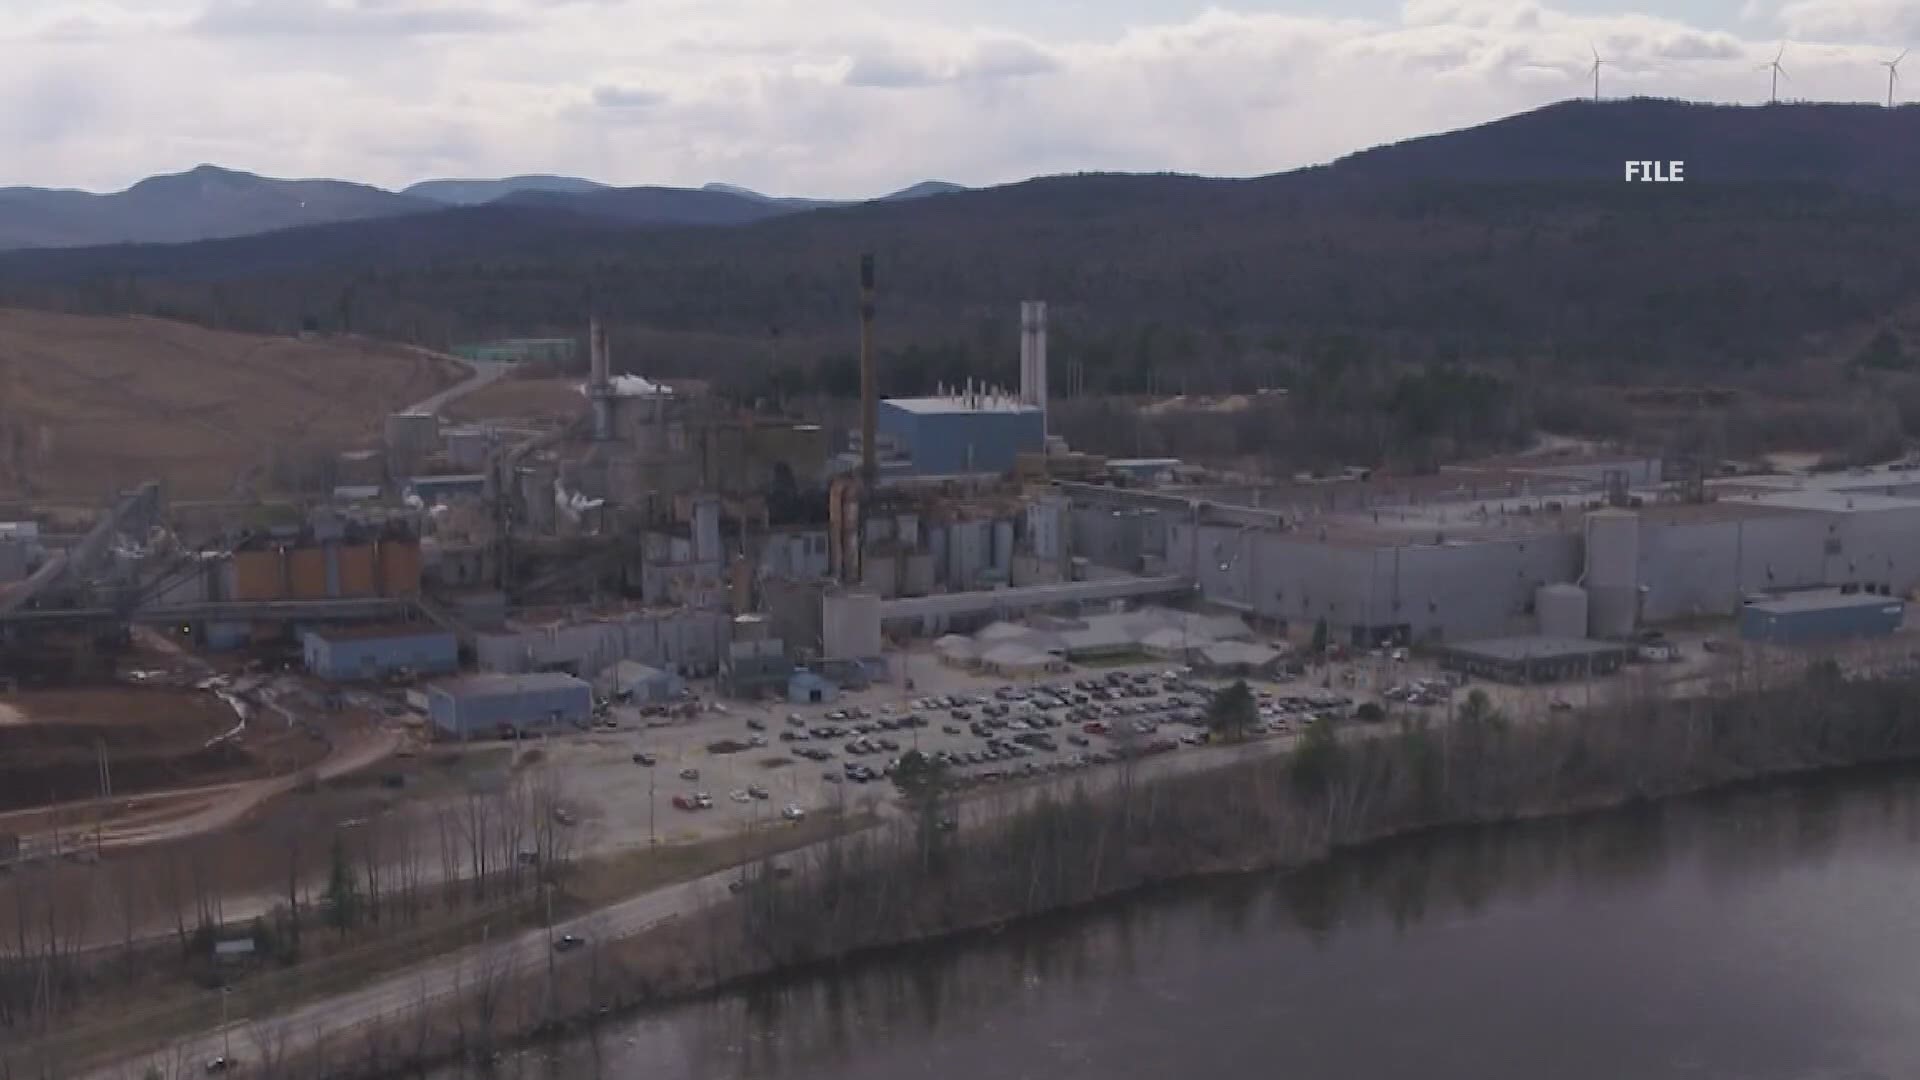 67 more layoffs have been ac=announced at the Androscoggin mill in Jay.